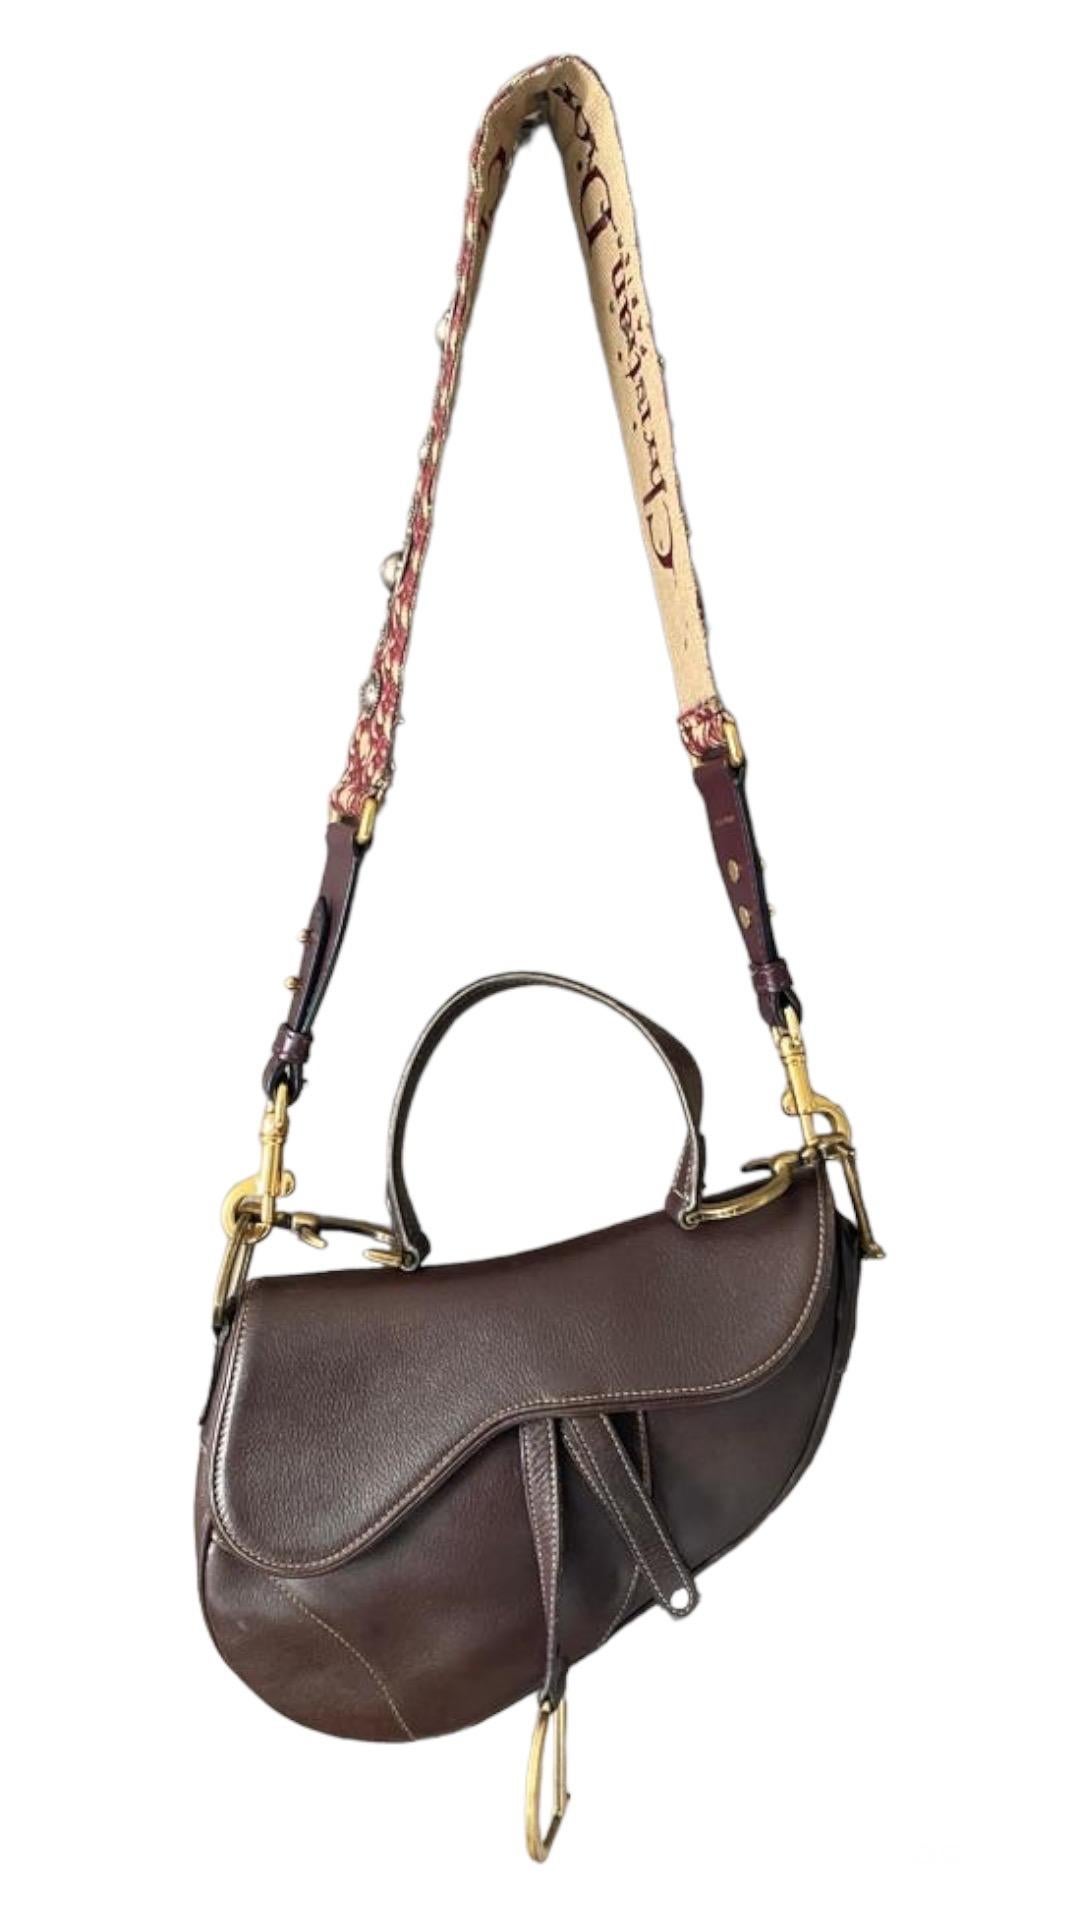 Women's or Men's Dior Saddle Bag by Jhon Galliano.